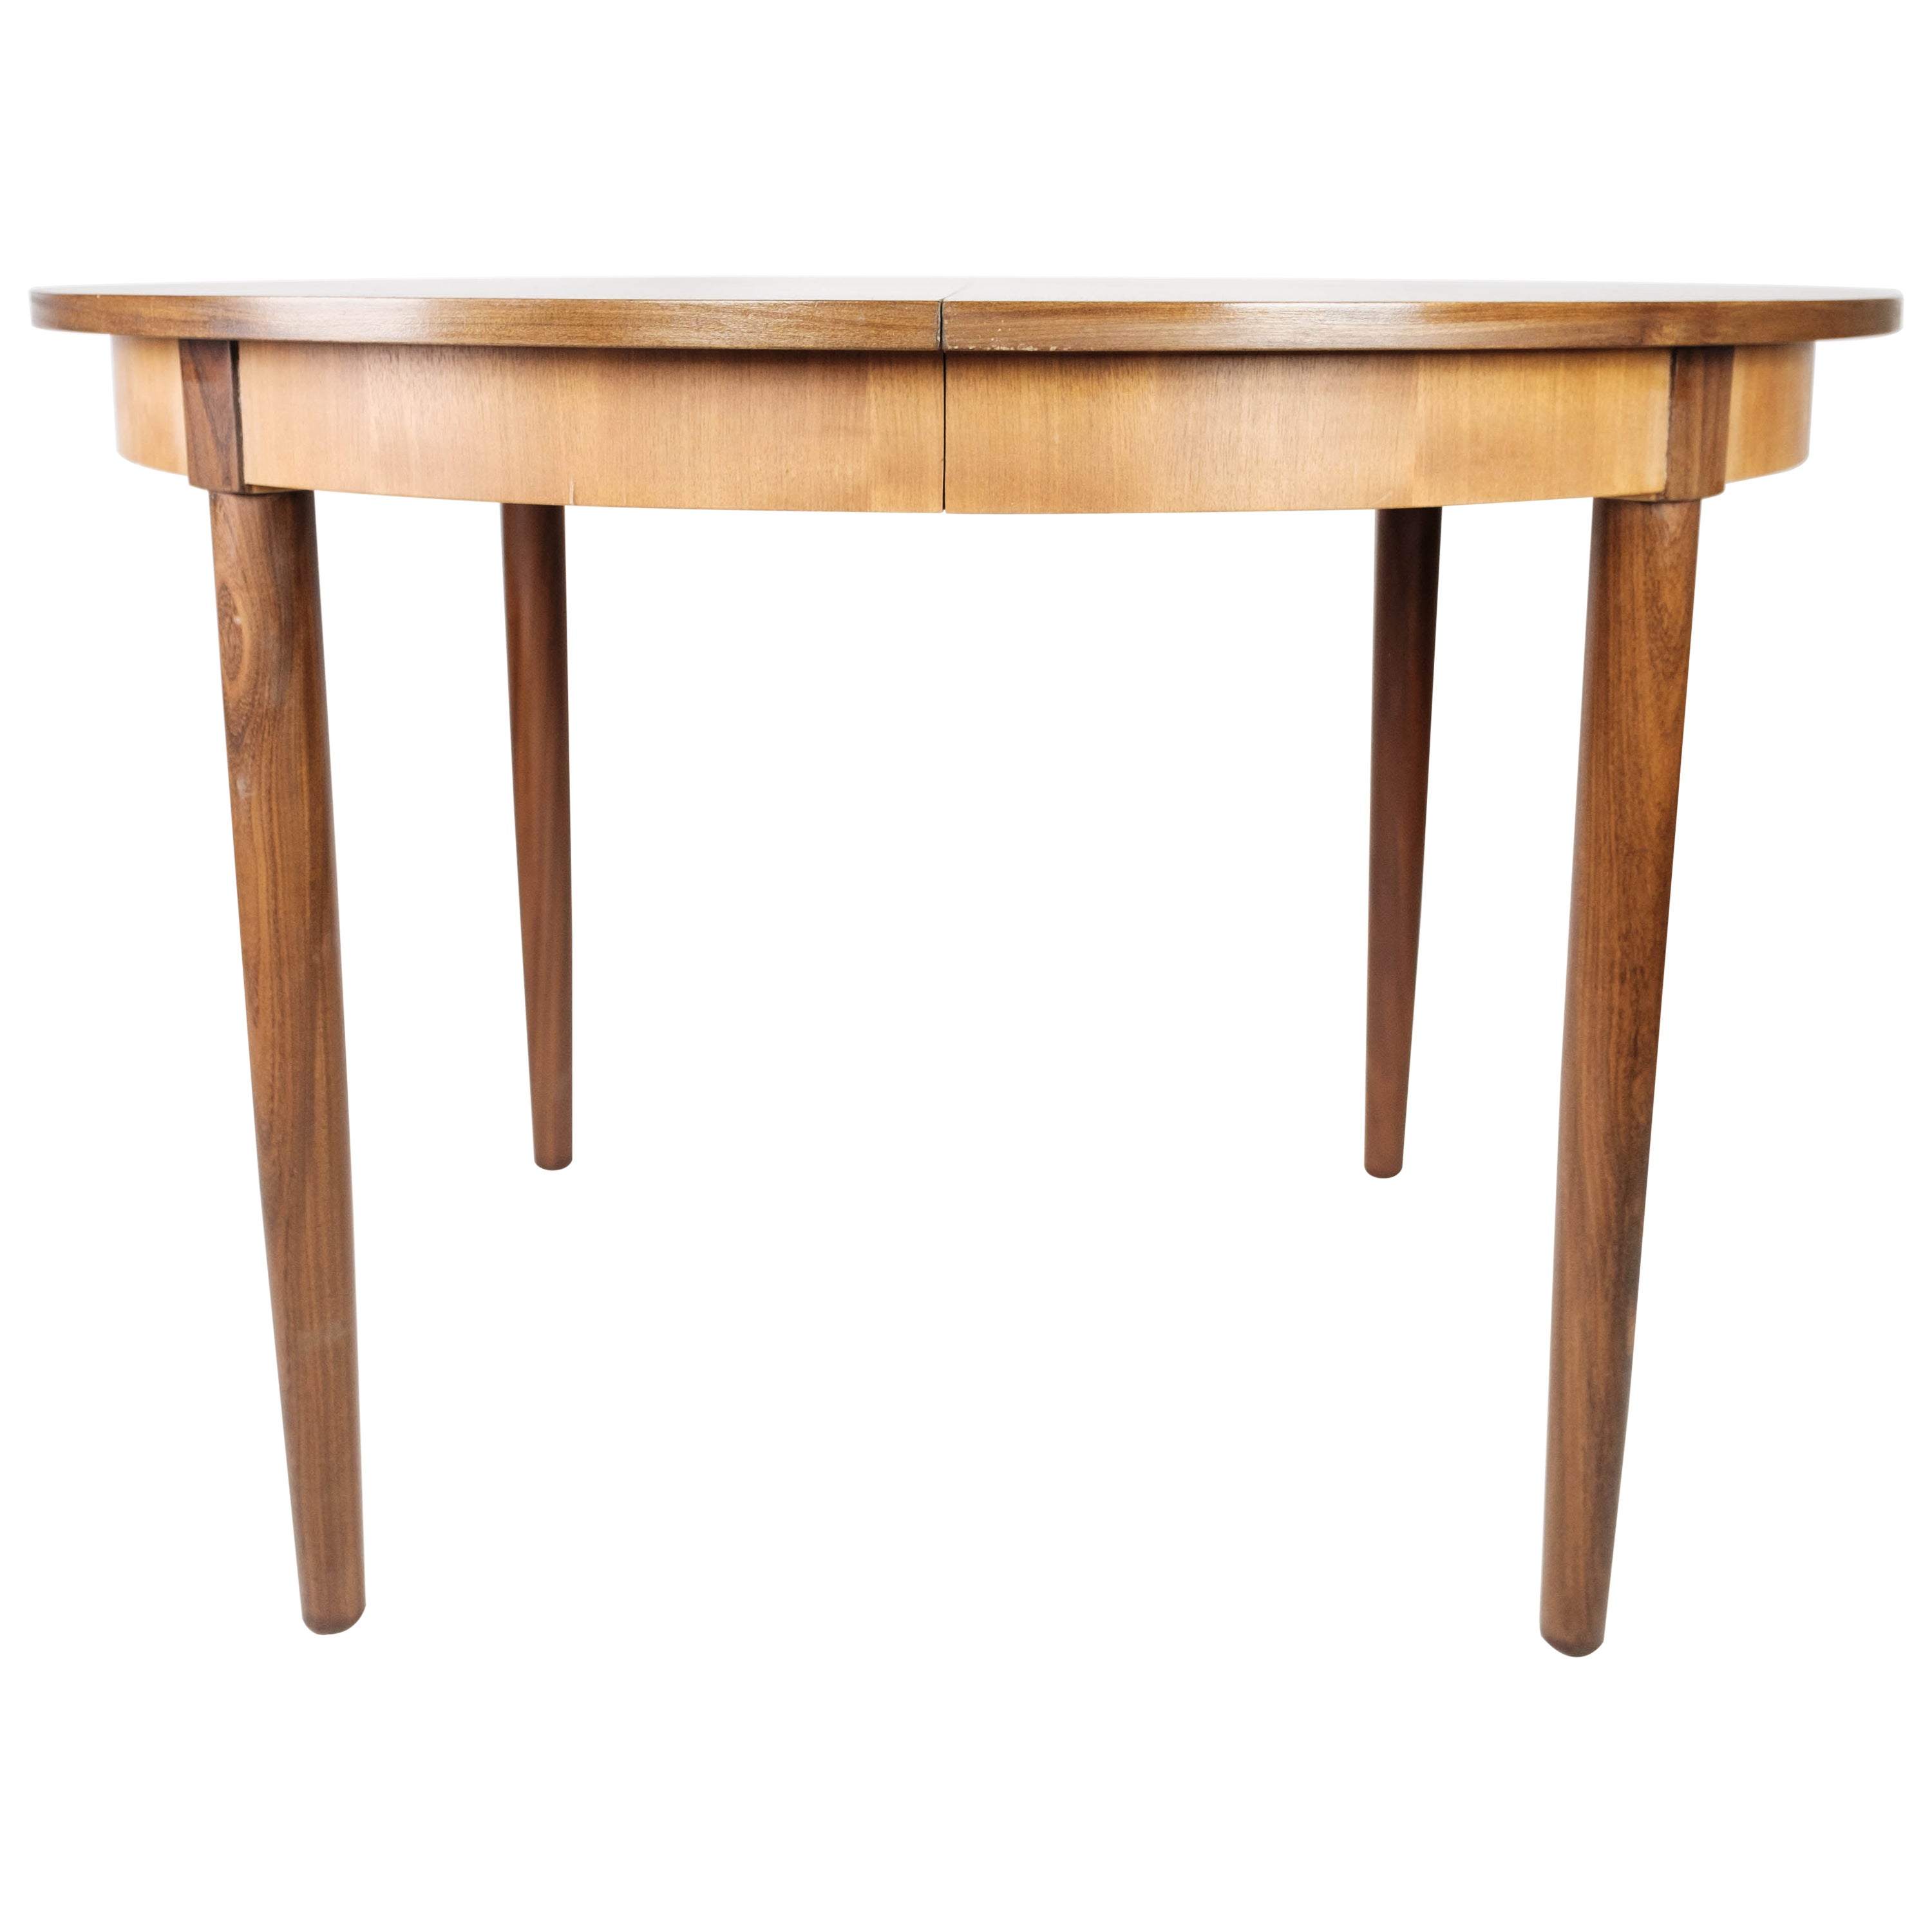 Dining Table Made In Teak With Extensions, Danish Design From 1960s